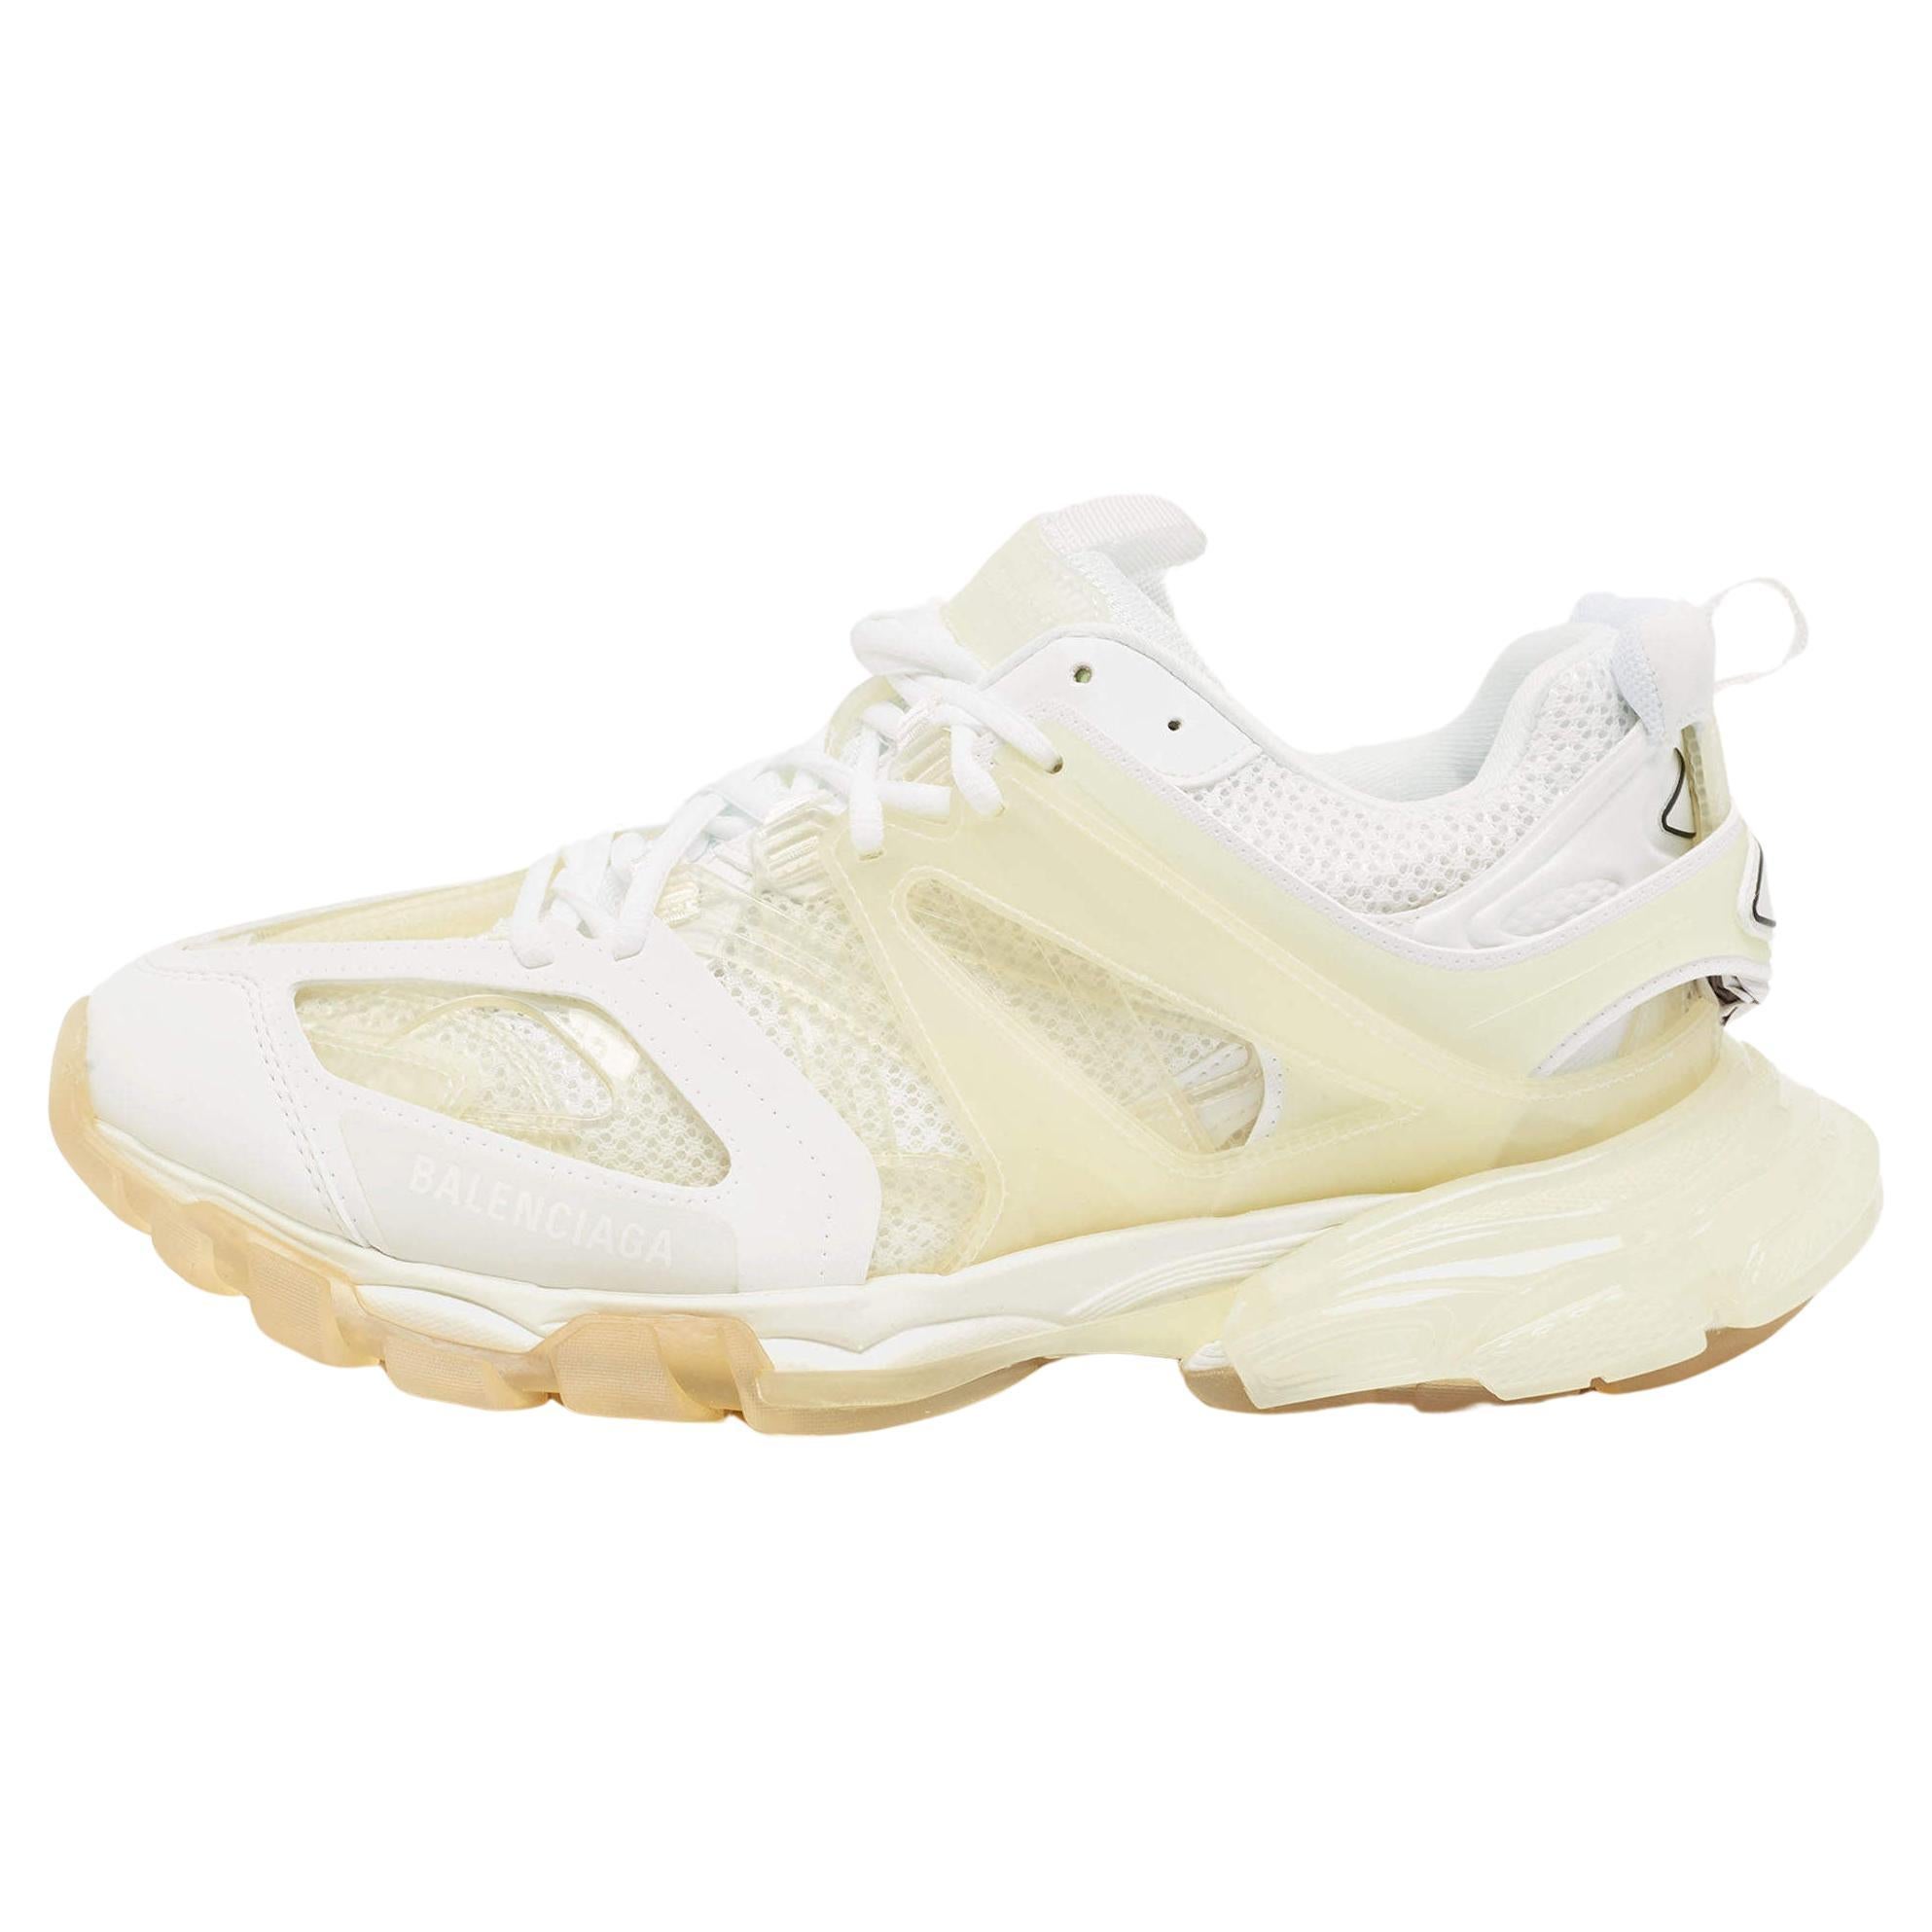 Balenciaga White/Transparent Leather and PVC Track Clear Sole Sneakers Size 44